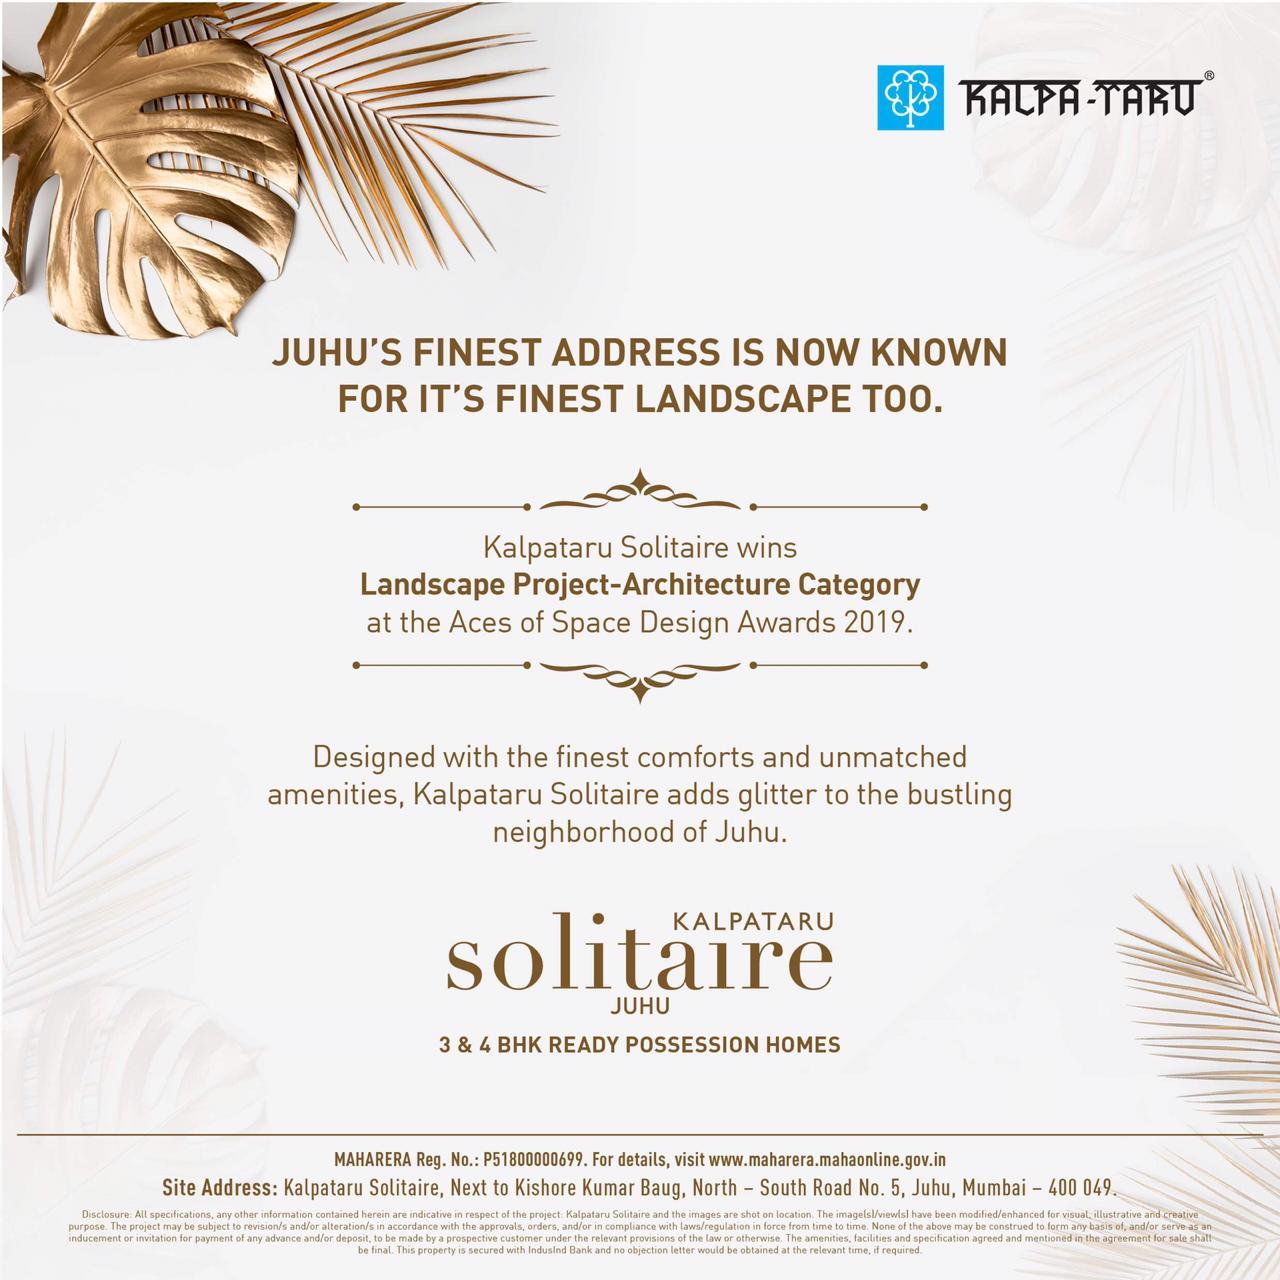 Kalpataru Solitaire wins landscape project-architecture category at the aces of space design awards 2019